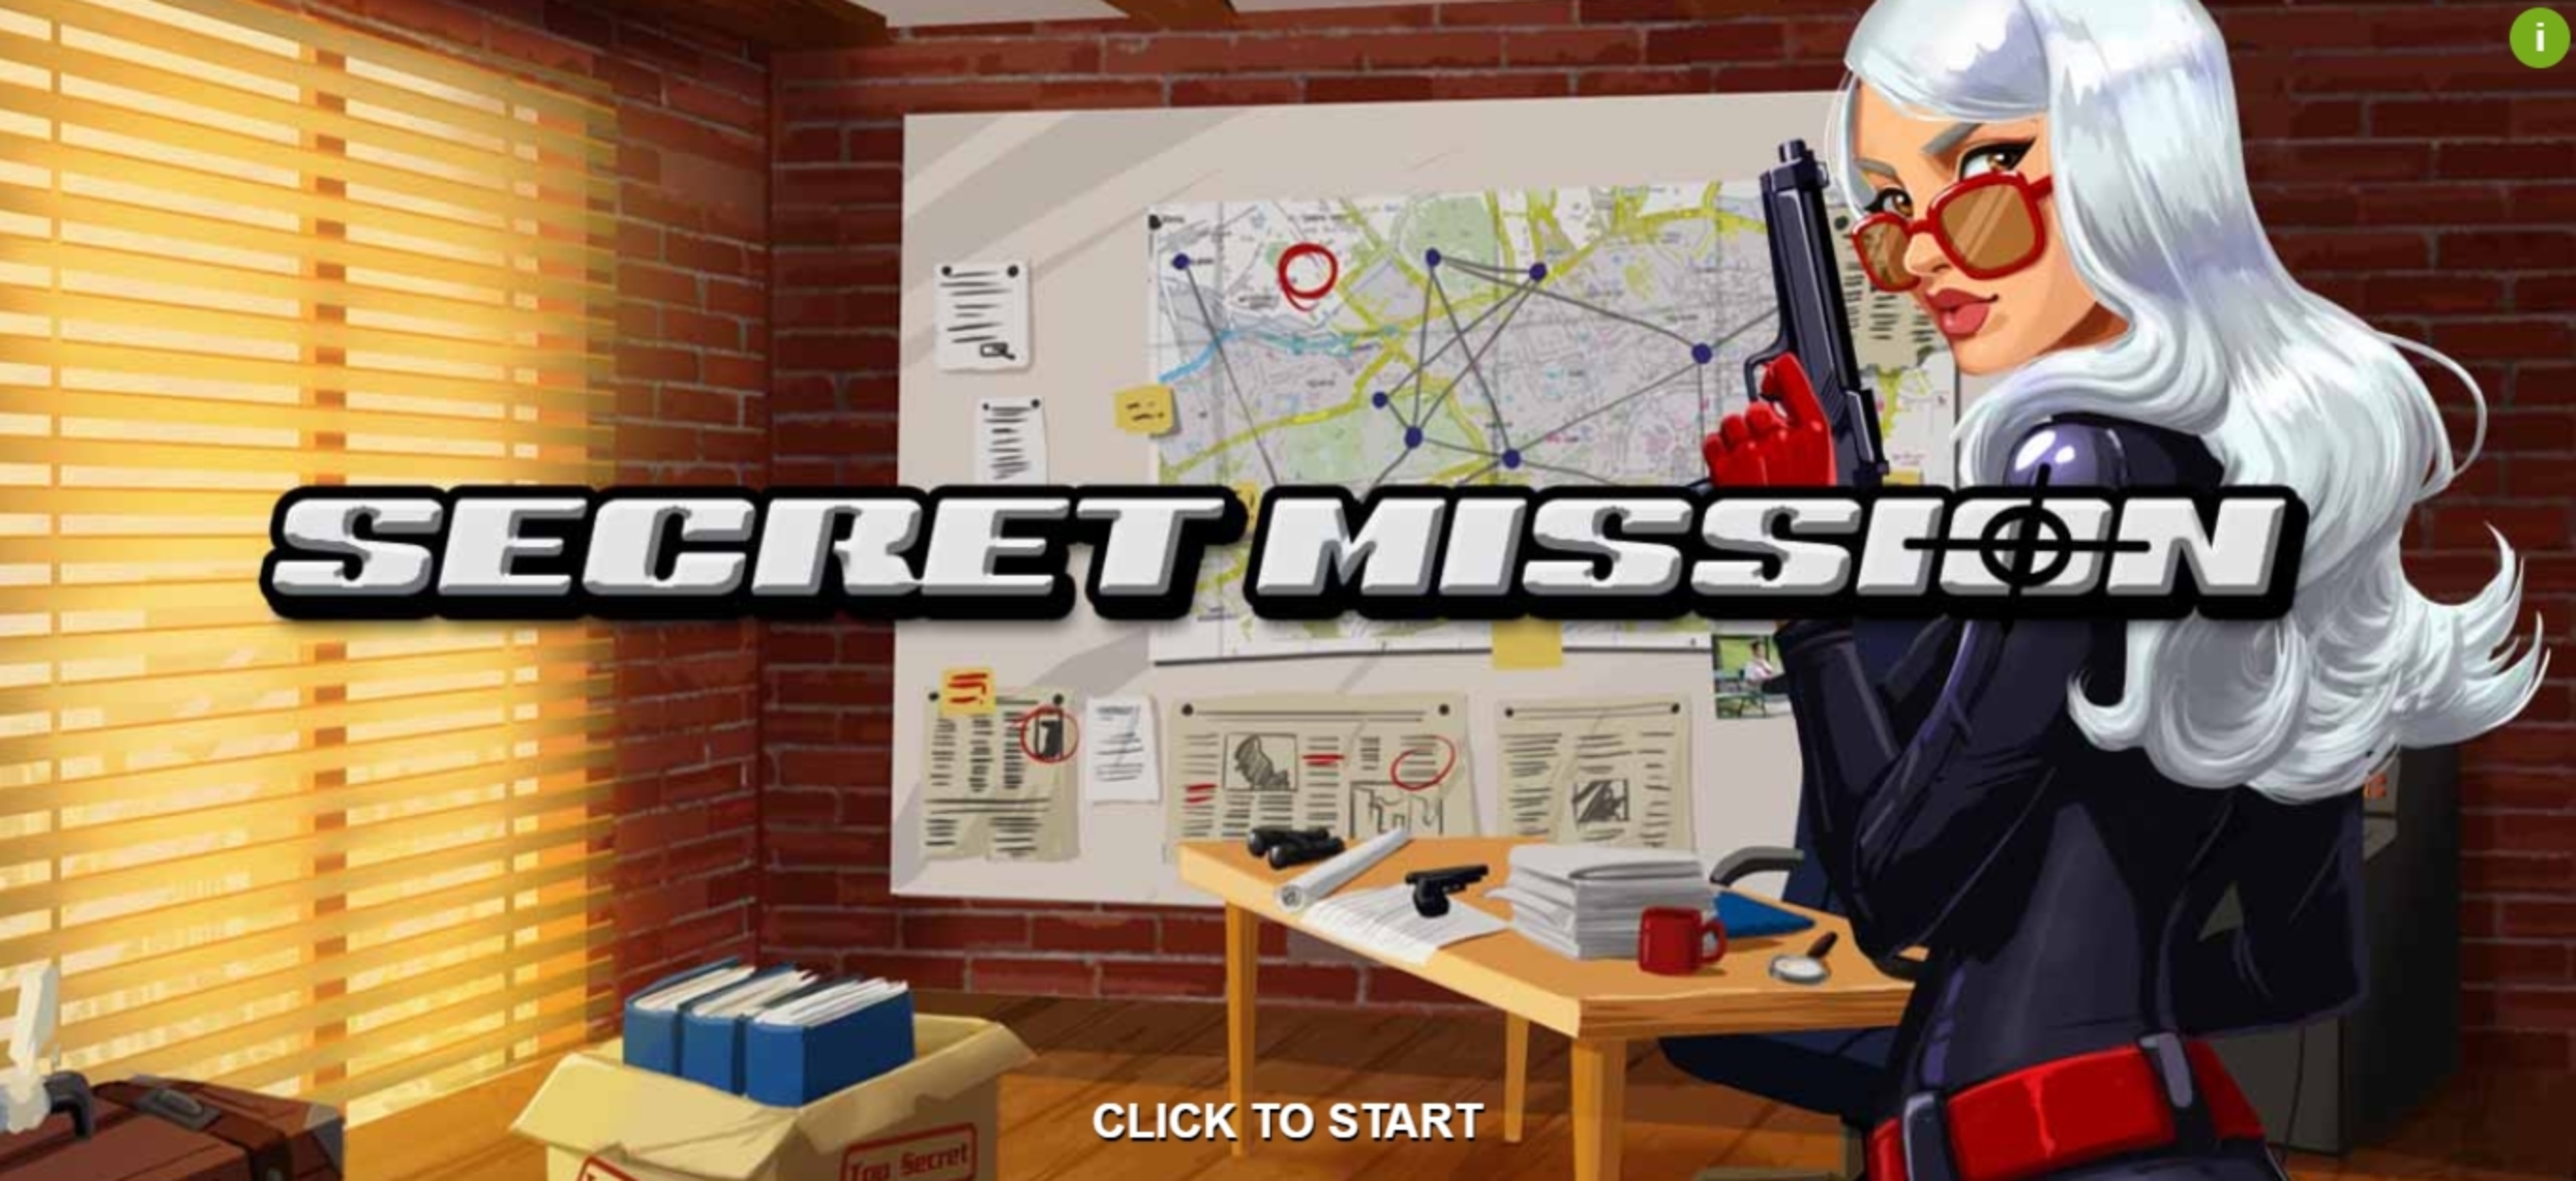 Play Secret Mission Free Casino Slot Game by WMS